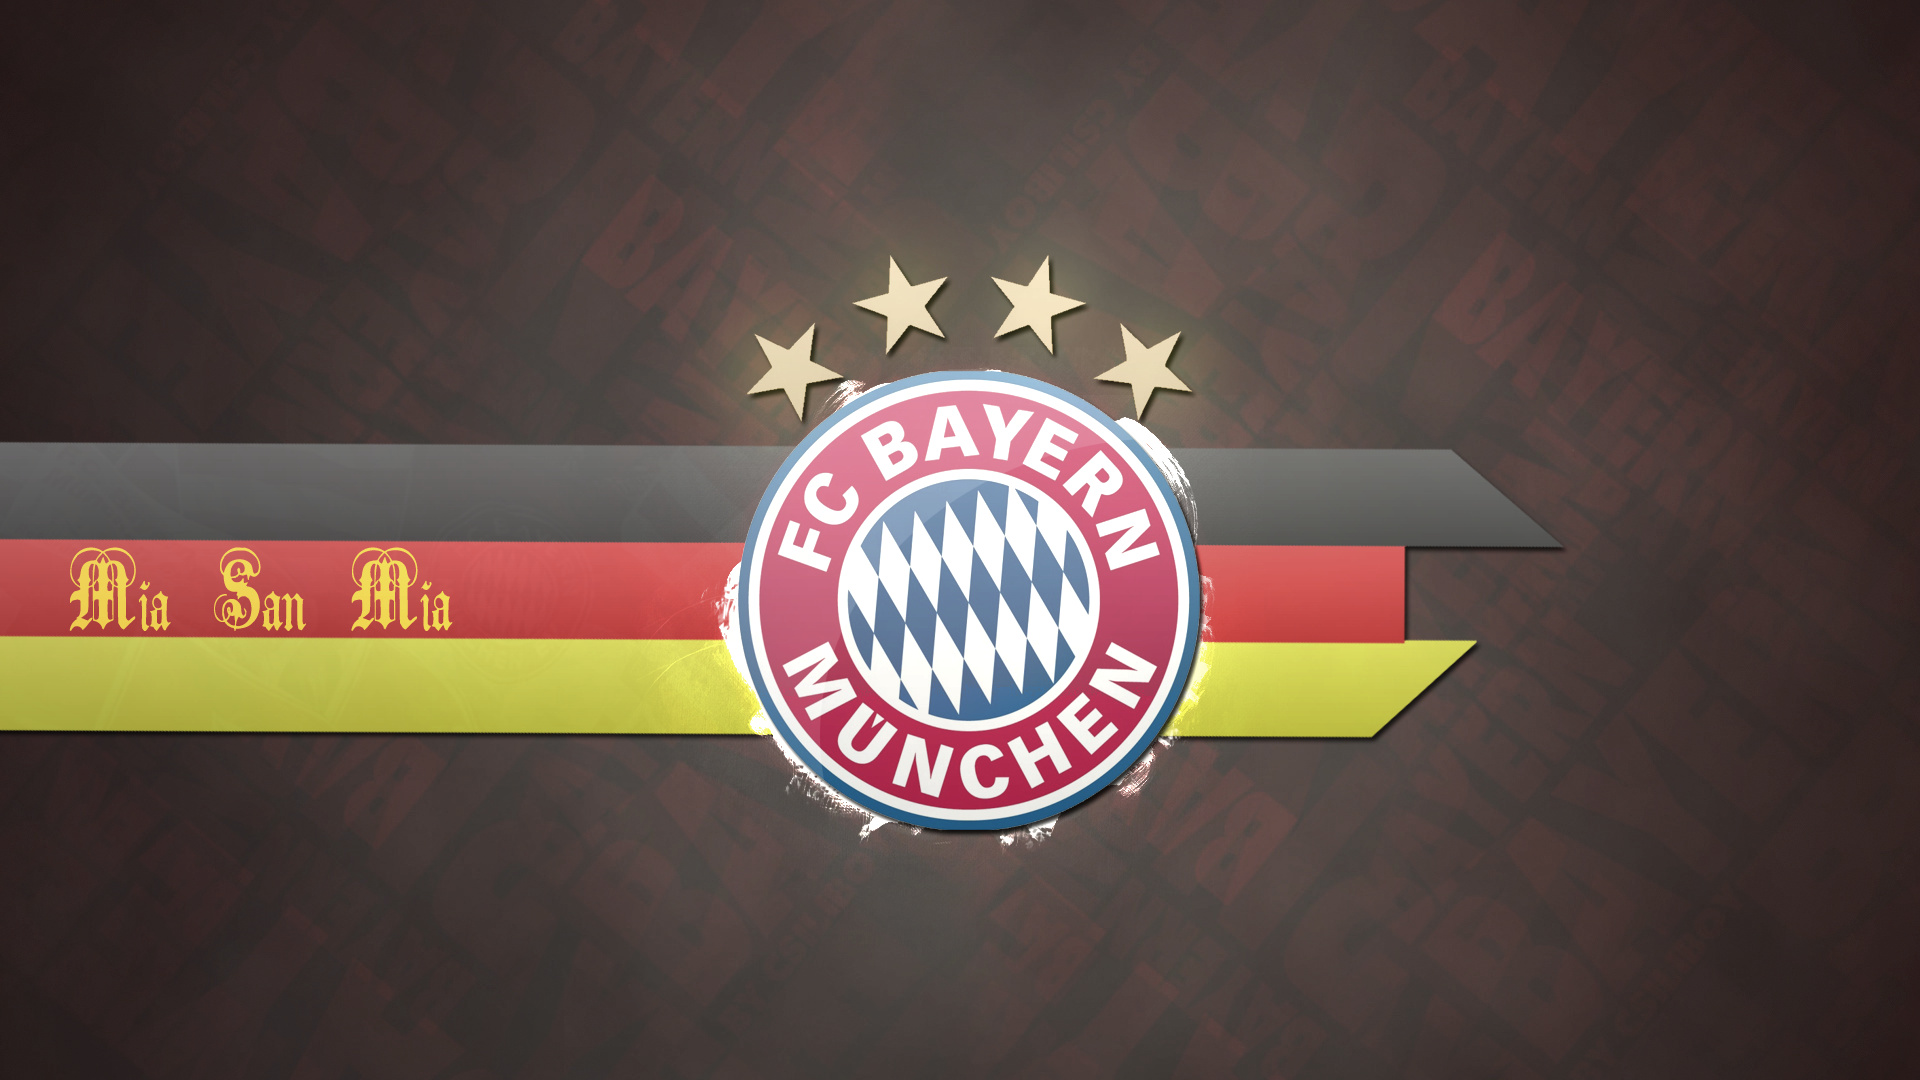 Bayern Munchen FC: First Champions League participation, 1994. 1920x1080 Full HD Background.